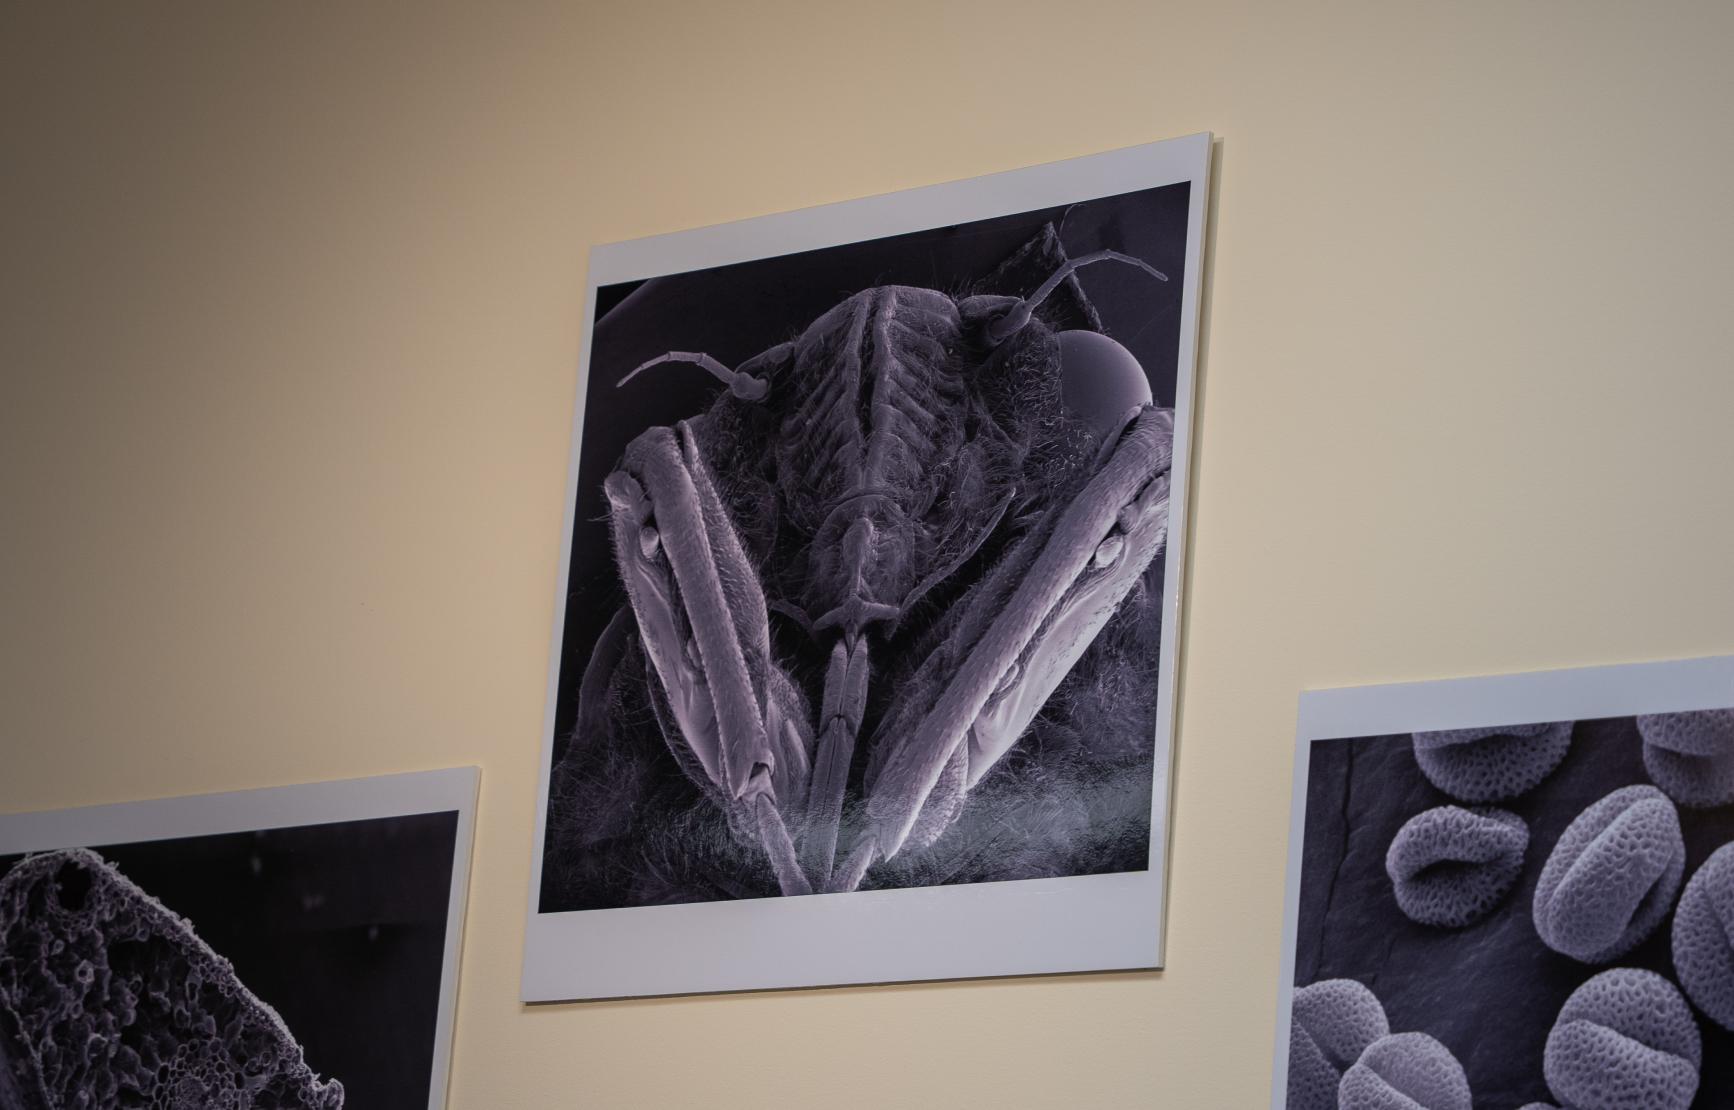 Printed images of microscoping photos.